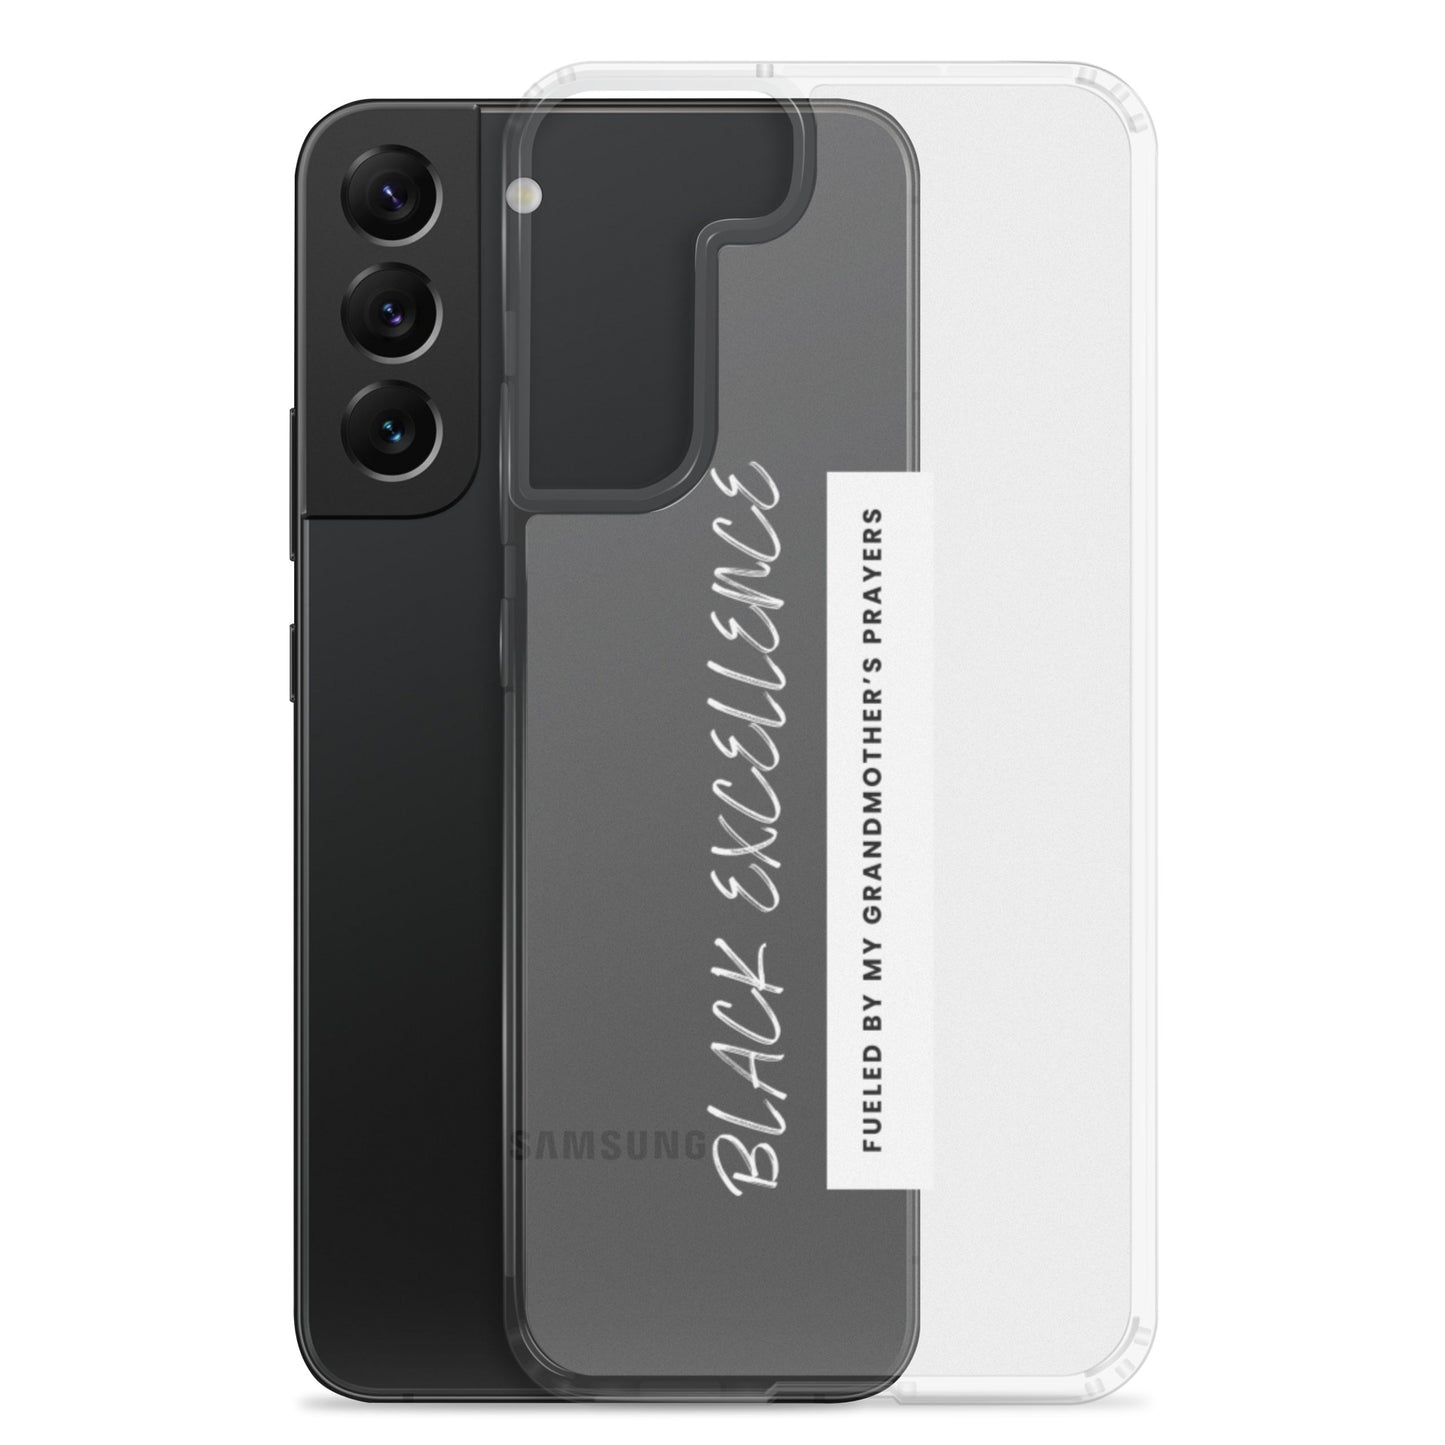 Fueled By My Grandmother's Prayers Samsung Case